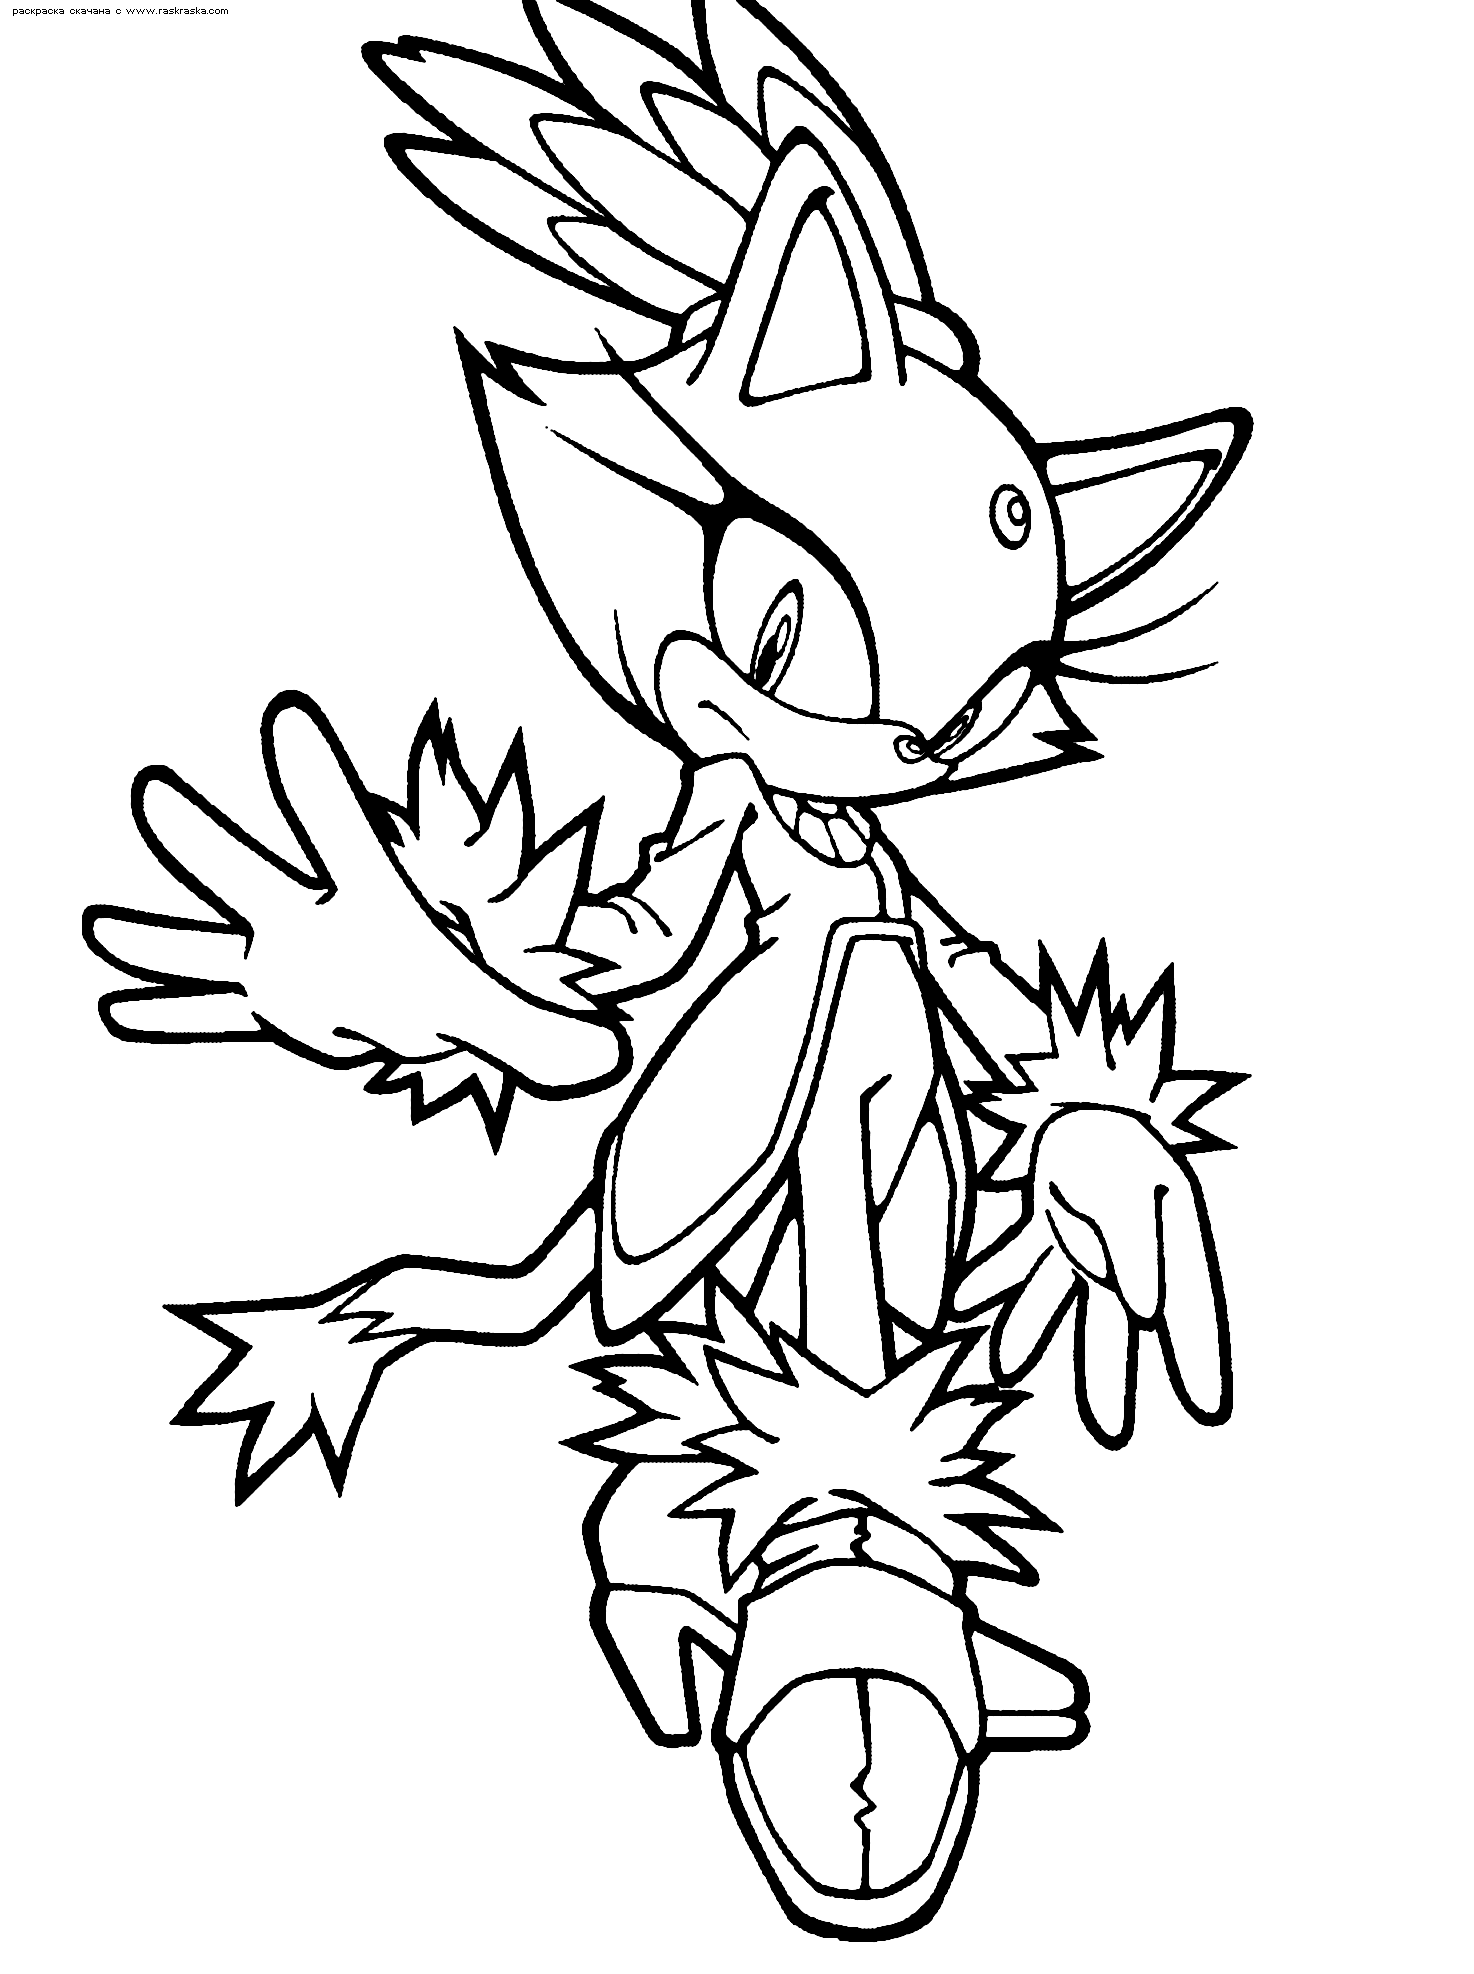 Sonic Coloring in Pages 2